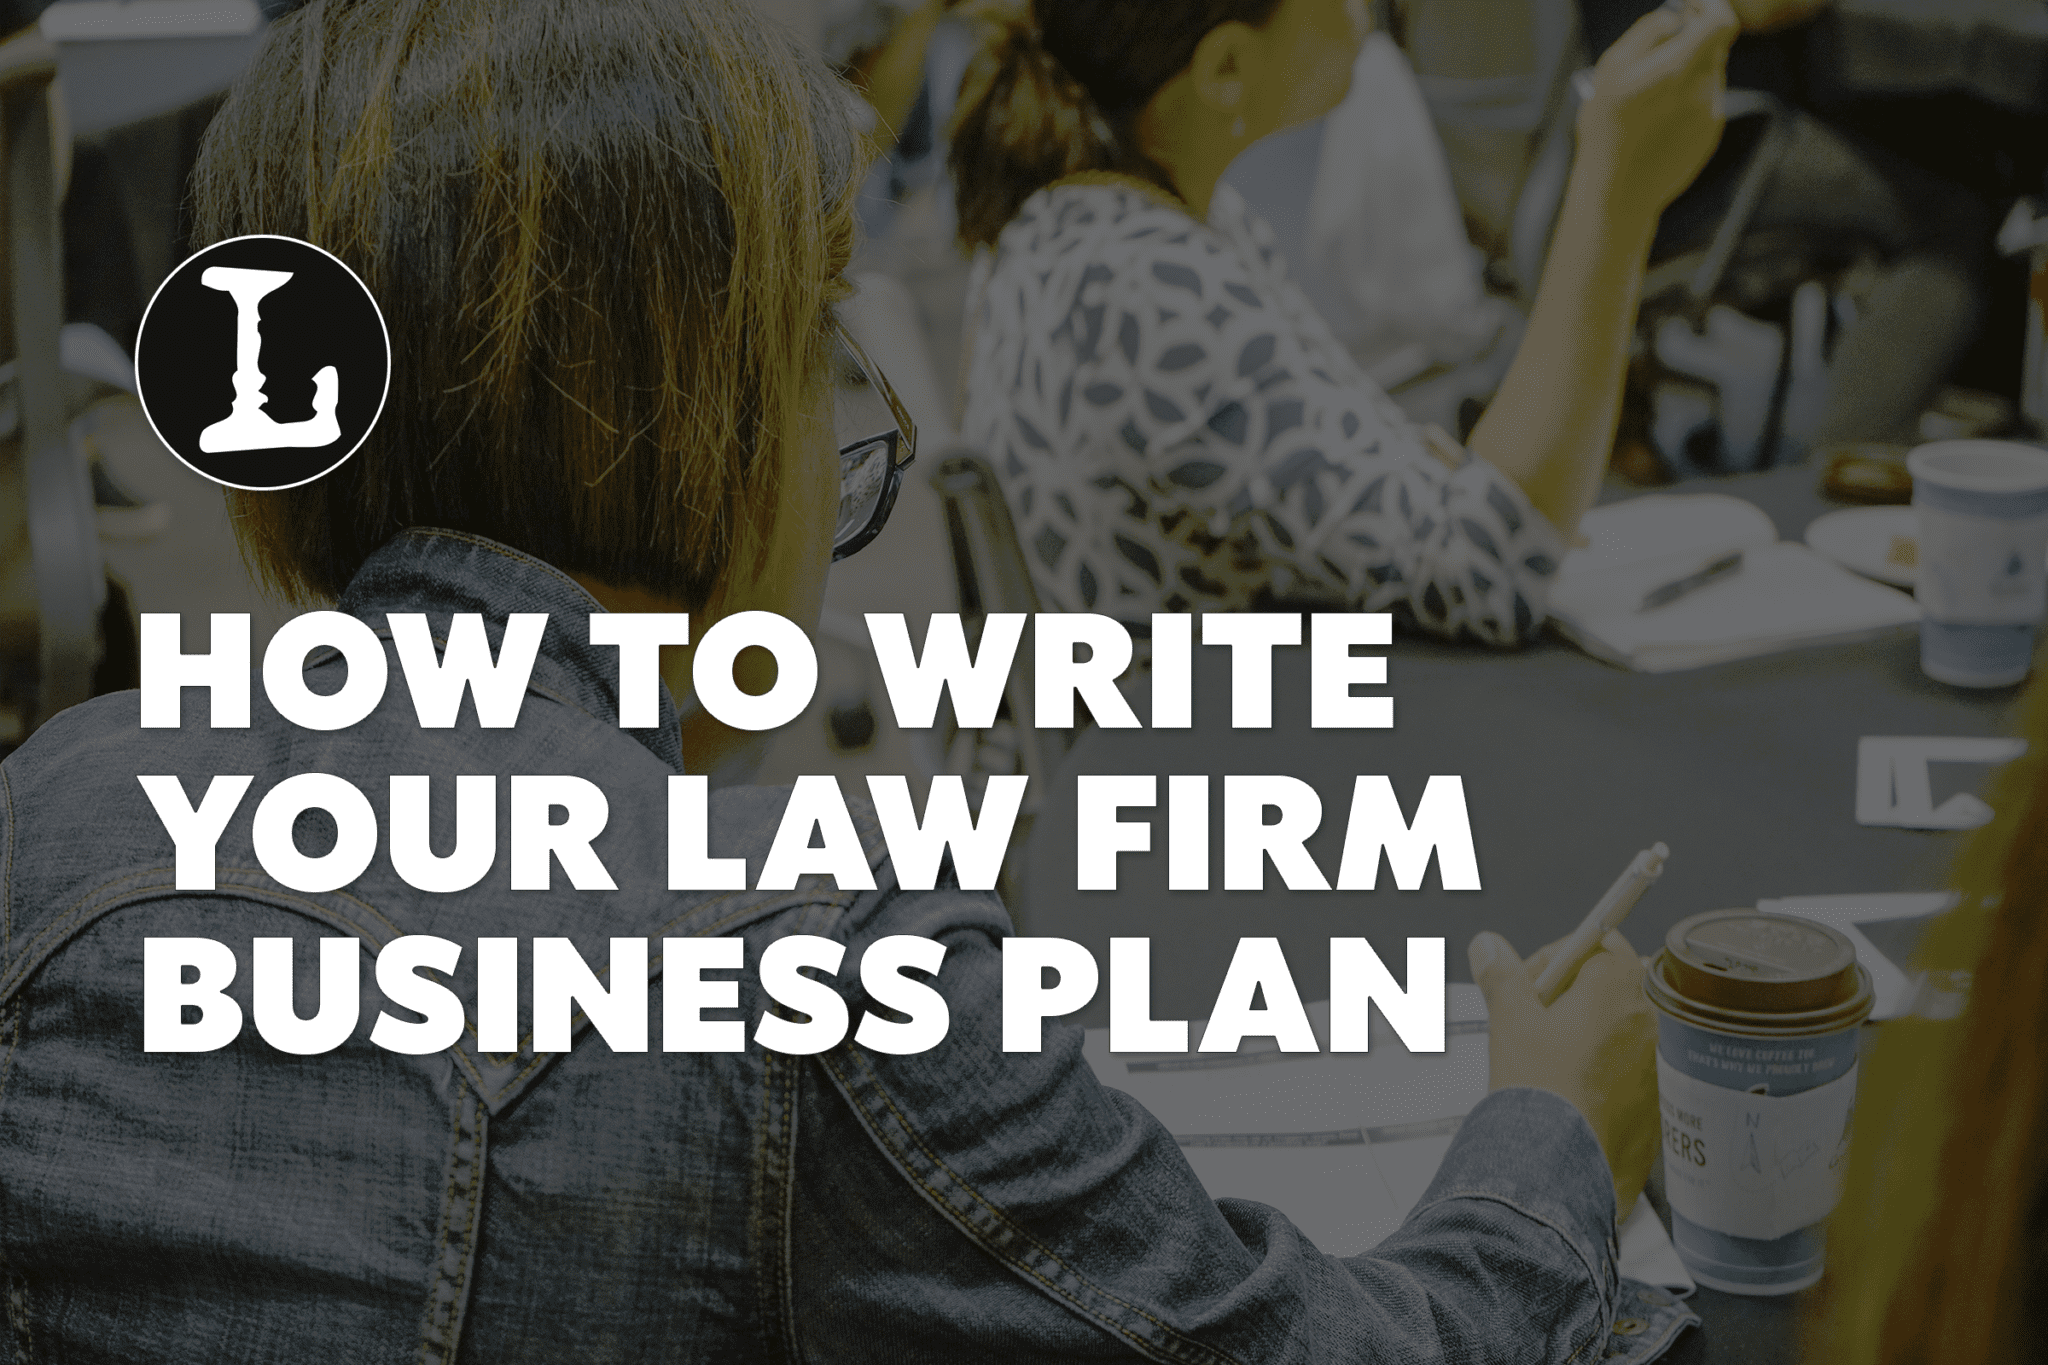 legal plan definition in business